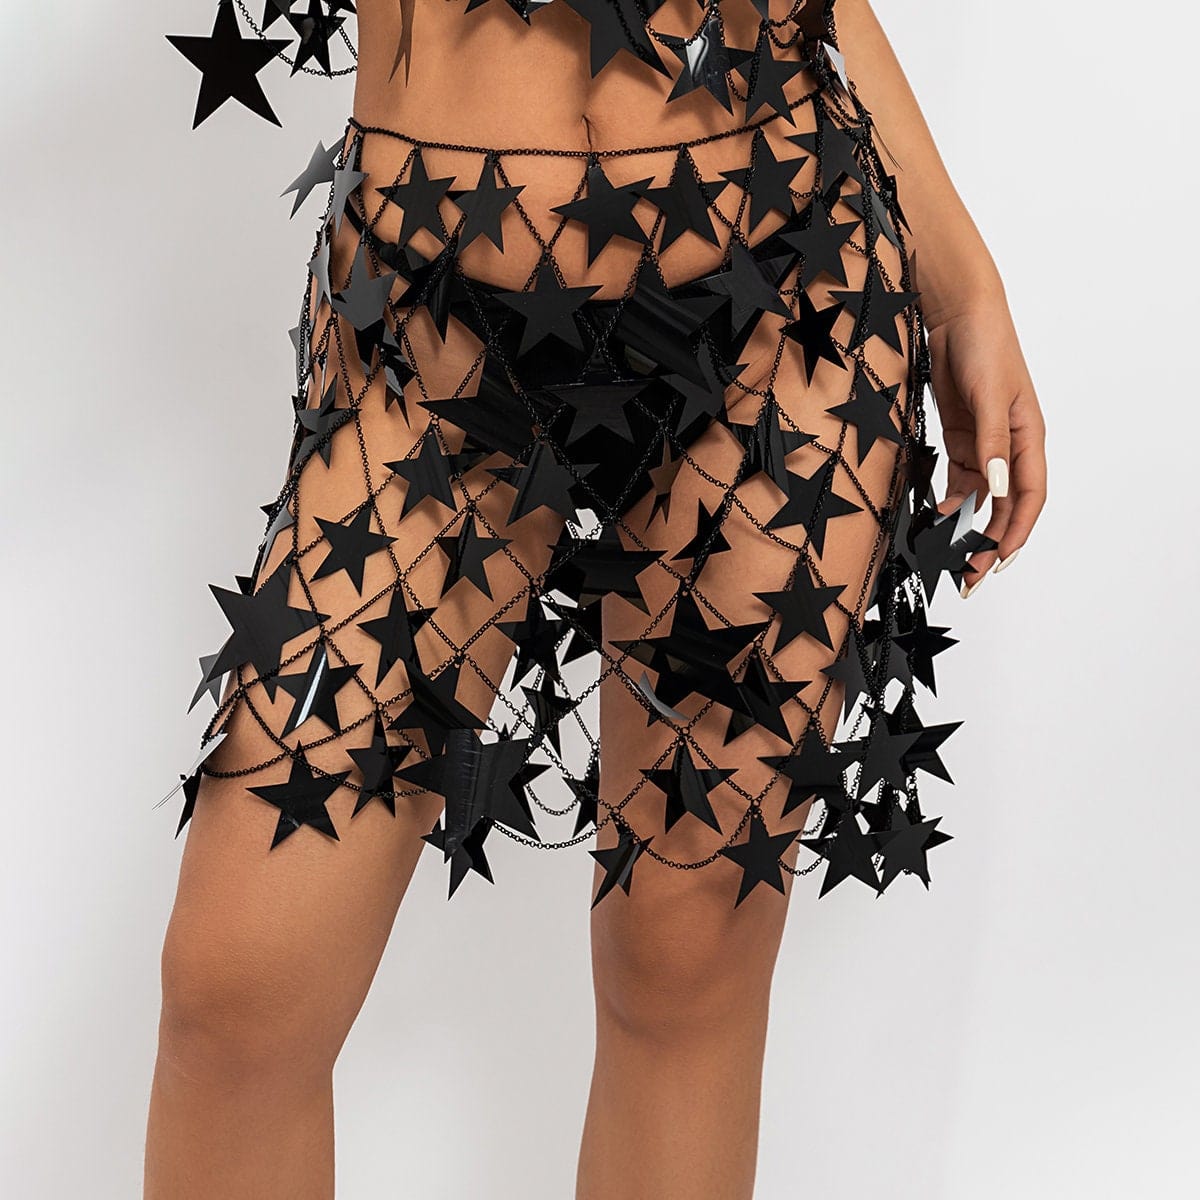 Handmade Squamous Hollow Pink Black Star Sequins Strappy Rave Party Skirt - ArtGalleryZen